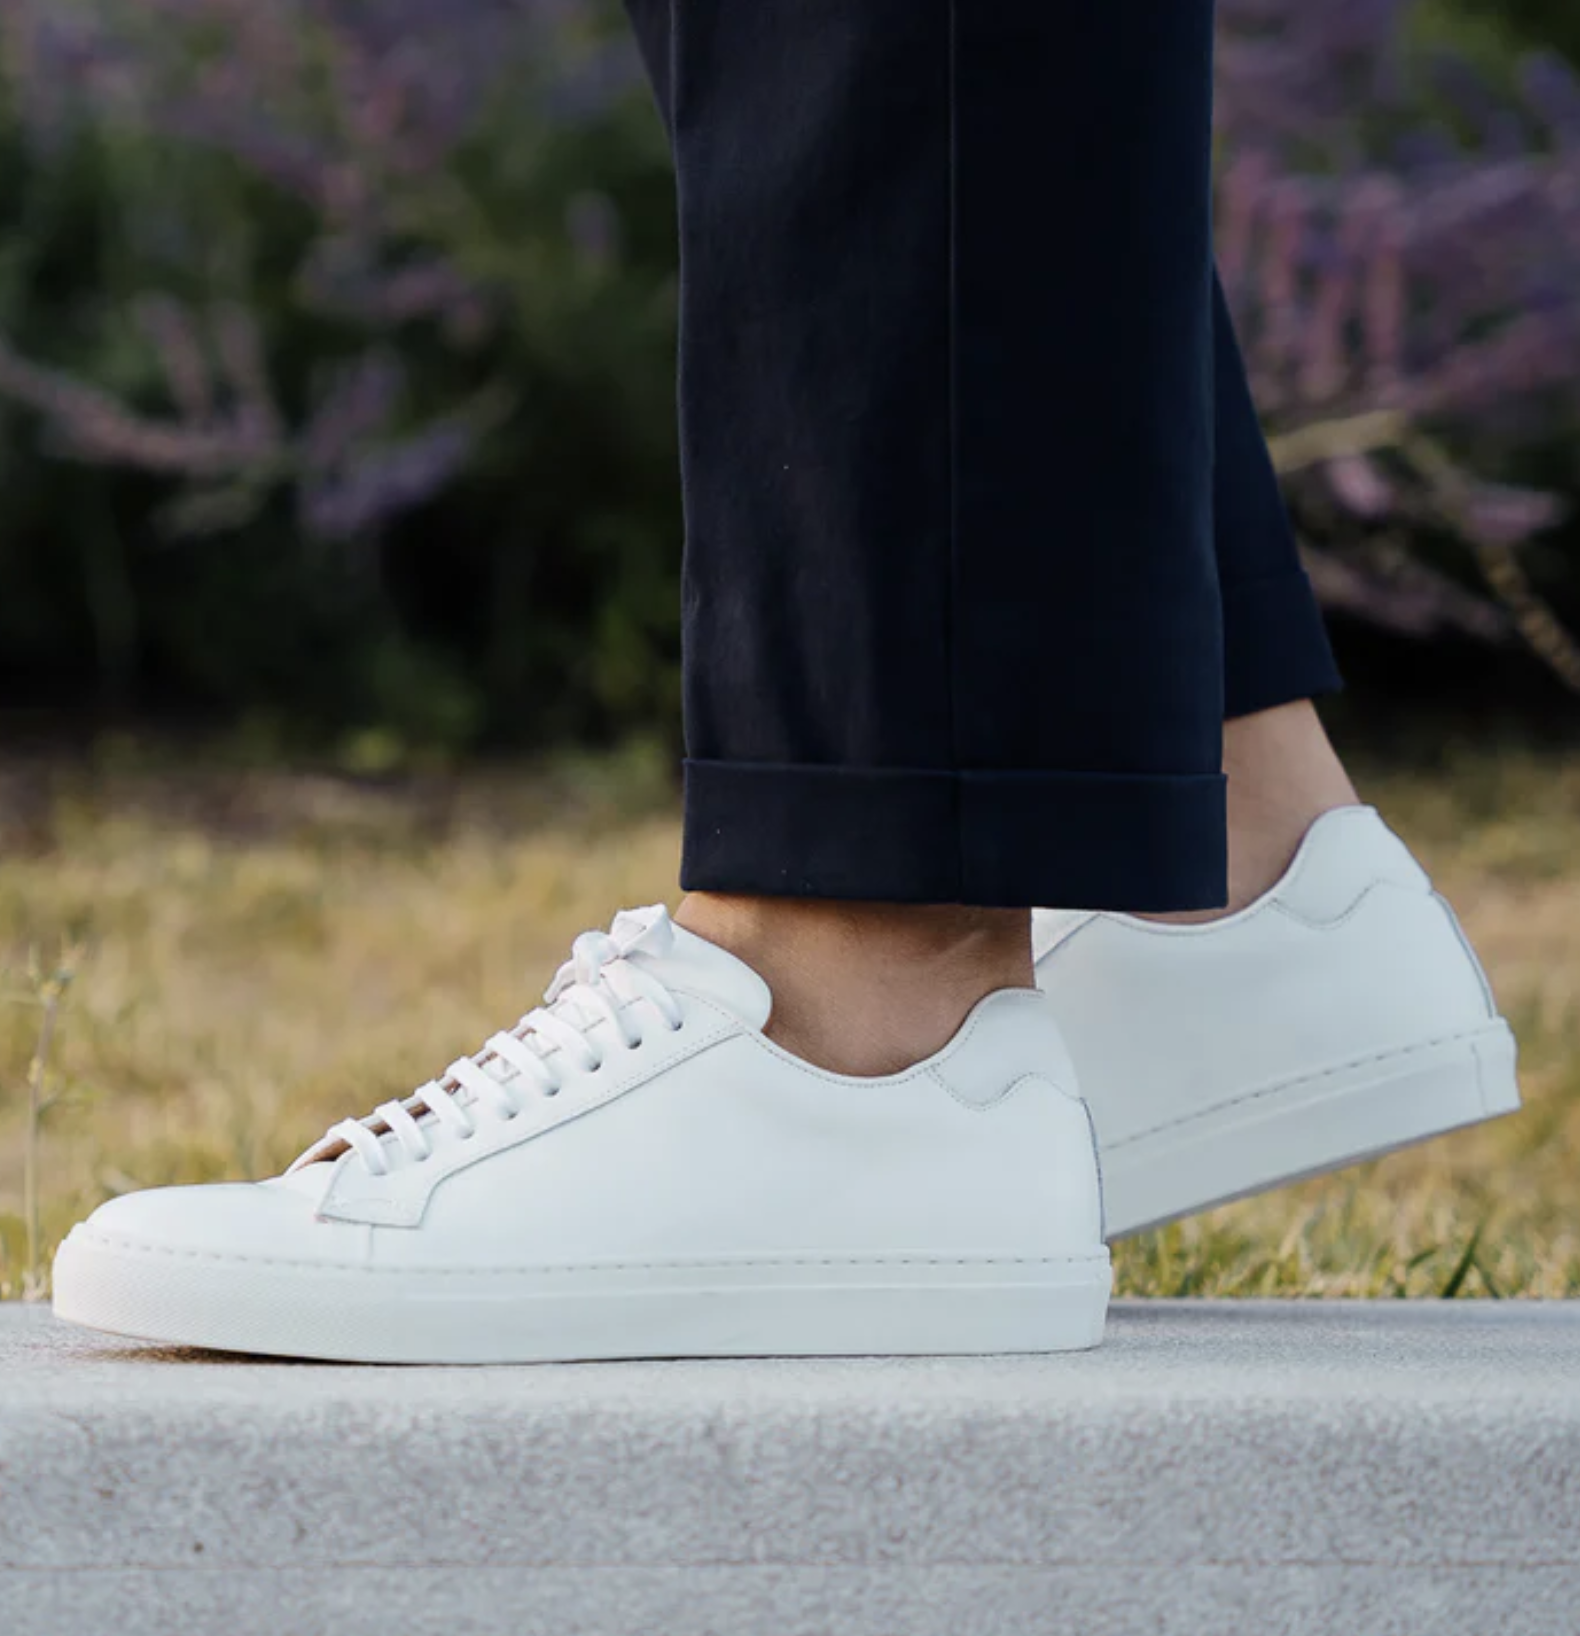 The 8 Best White Trainers for Men in 2022